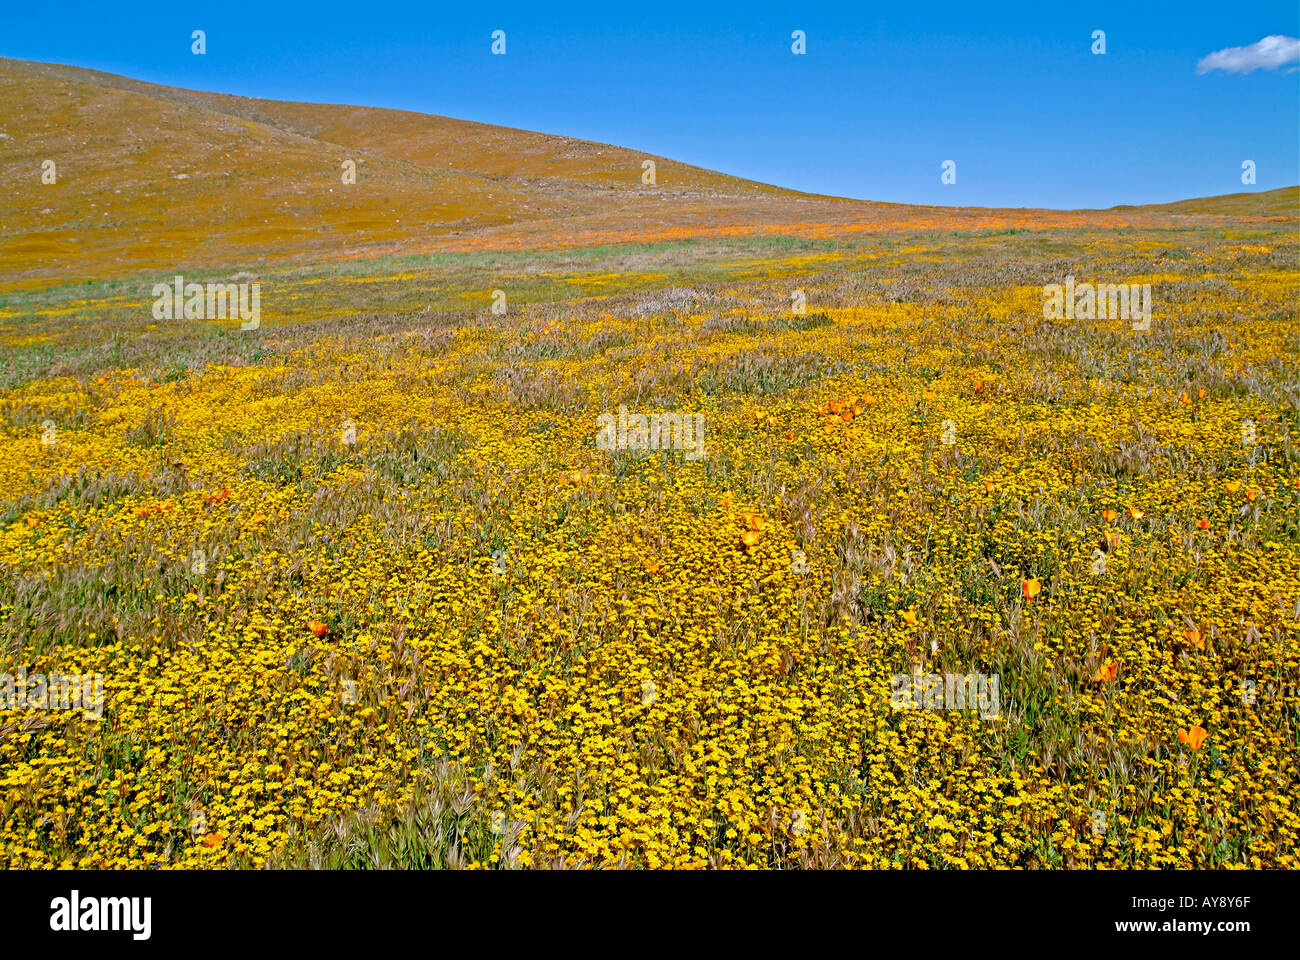 Field of Wildflowers in bloom in sunny southern California Antelope Valley Poppy Reserve Mohave Desert Stock Photo